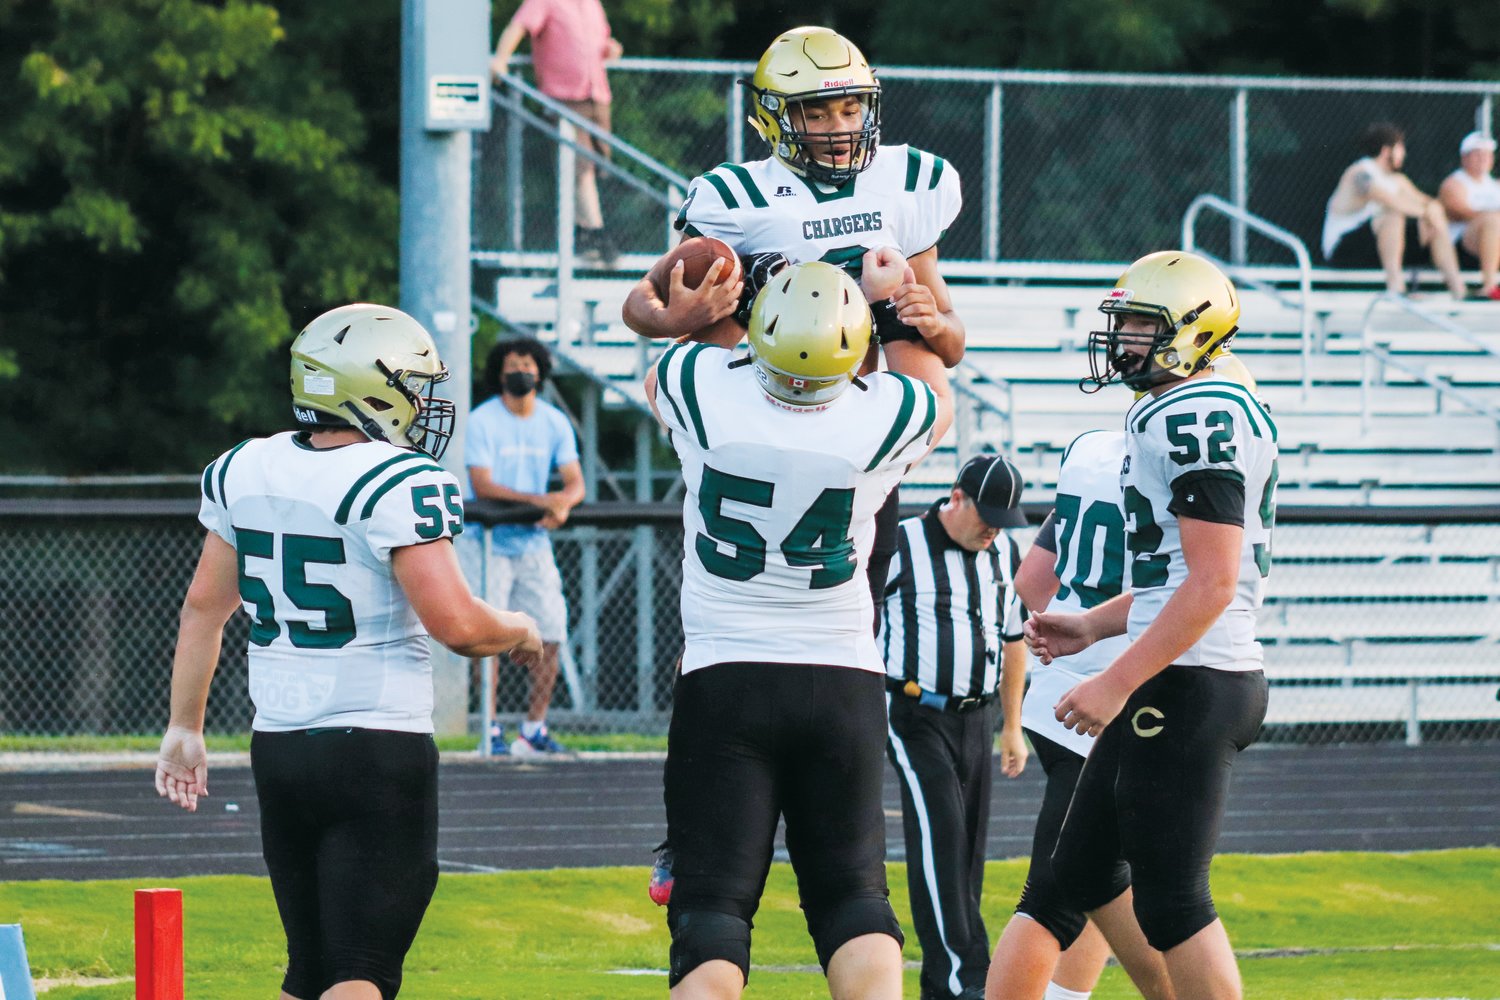 Northwood senior center Robbie Delgado (54) lifts senior running back Jalen Paige (with ball) in celebration after Paige ran for a 13-yard touchdown in the first quarter of the Chargers' 72-0 victory over Jordan-Matthews last Friday.